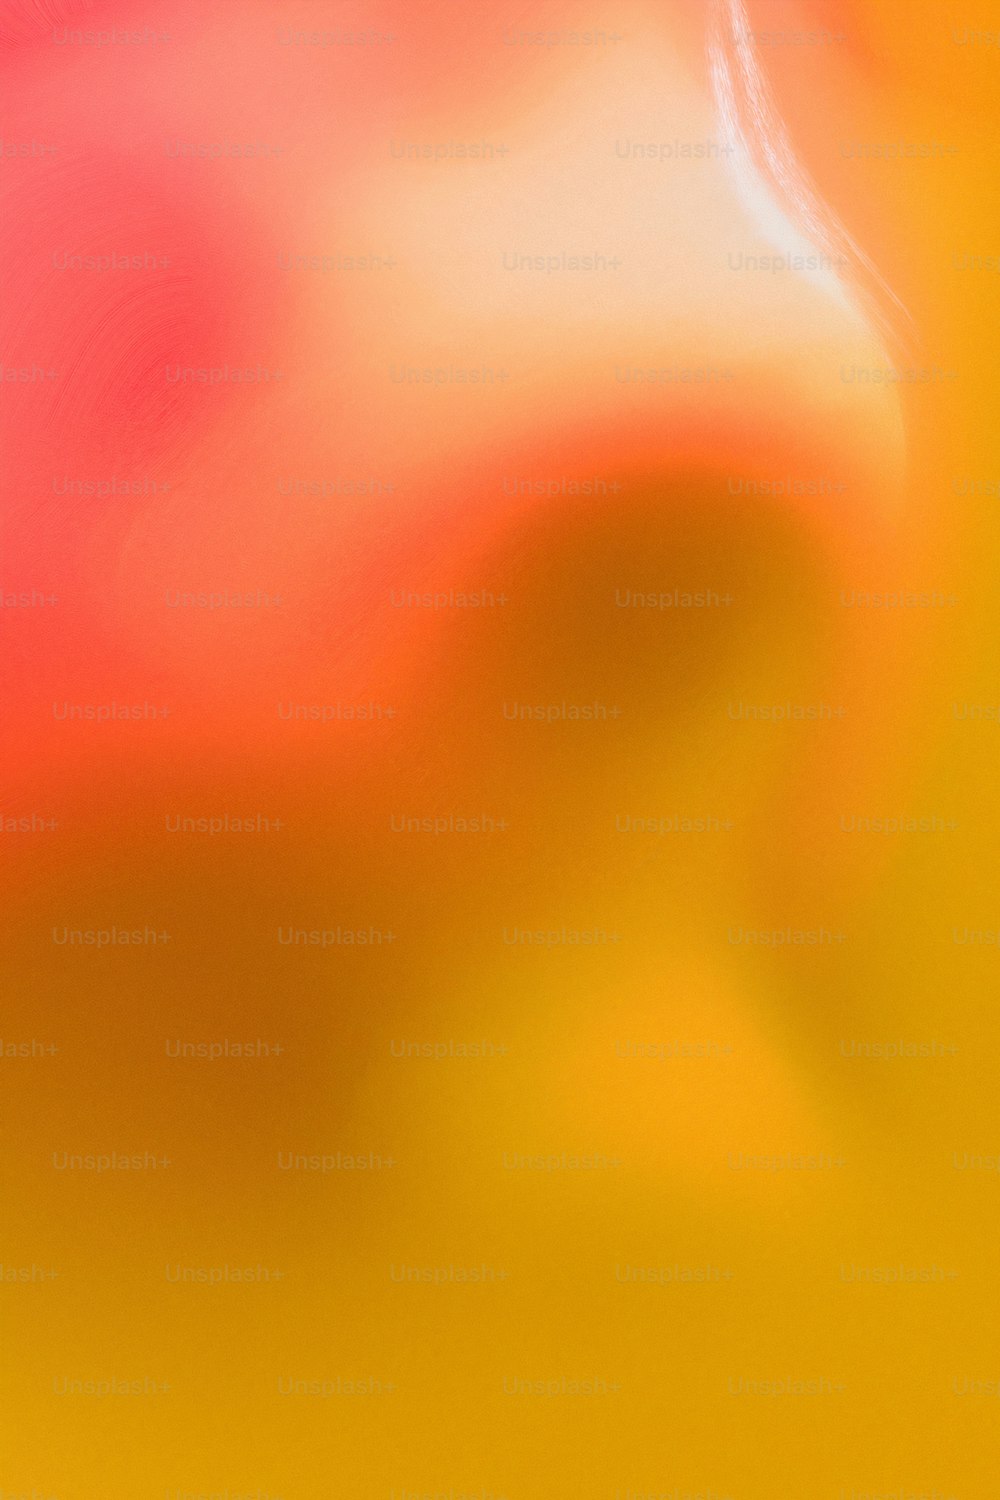 a blurry image of a red and yellow background